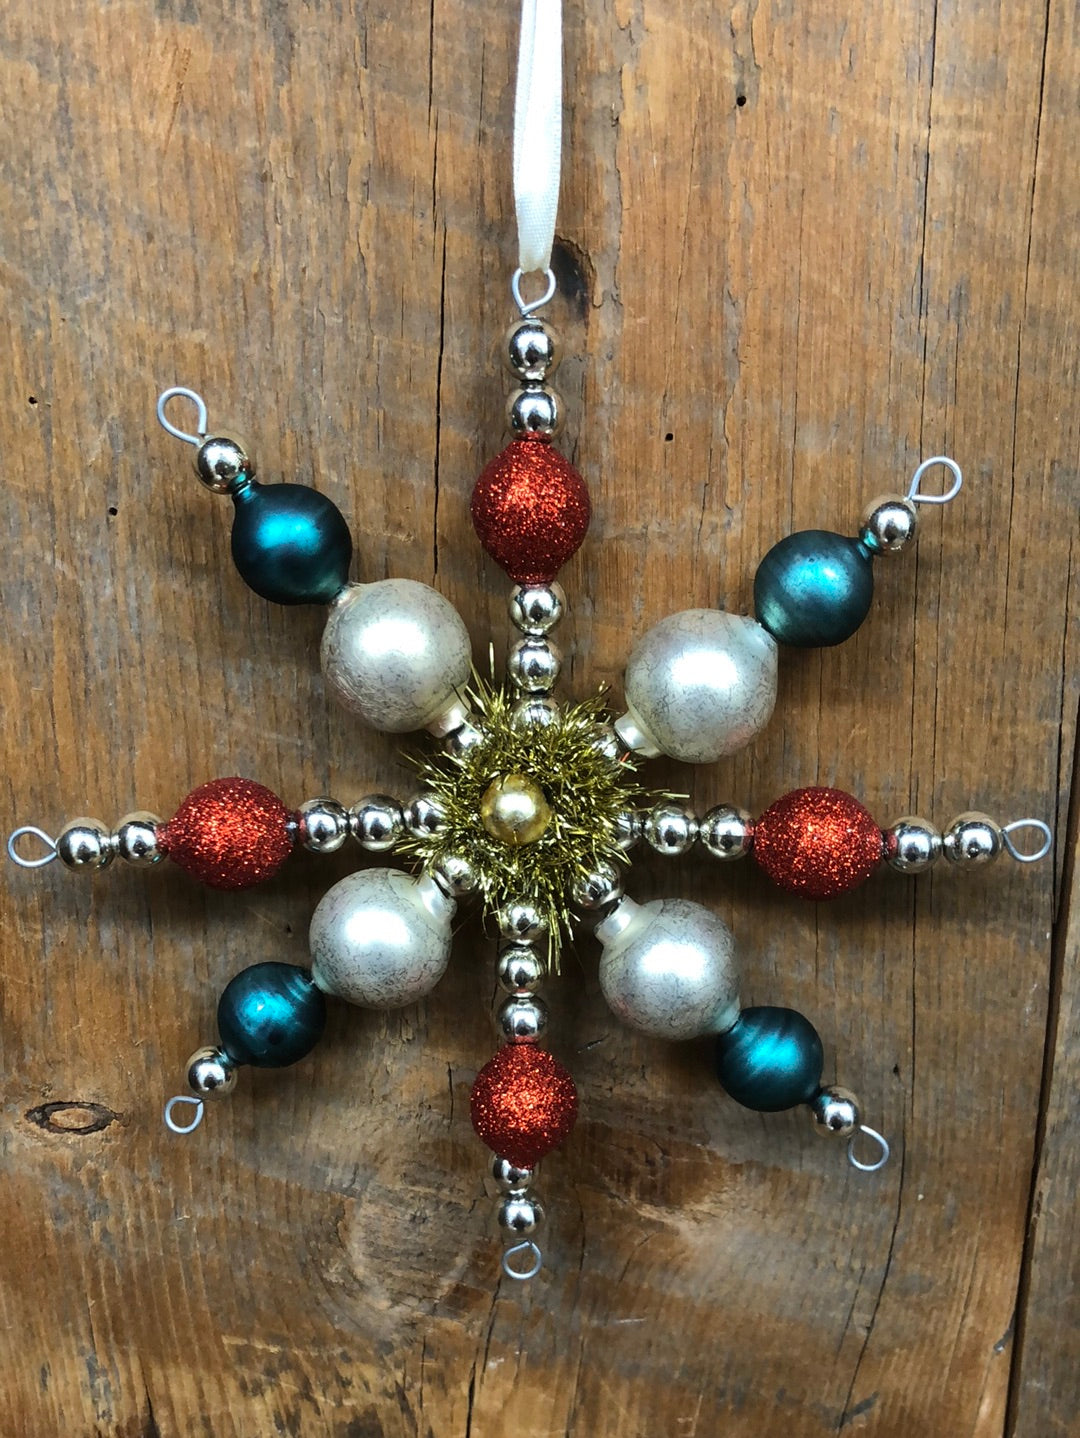 Glass Bead Snowflake Ornament with Tinsel and Blue White Gold